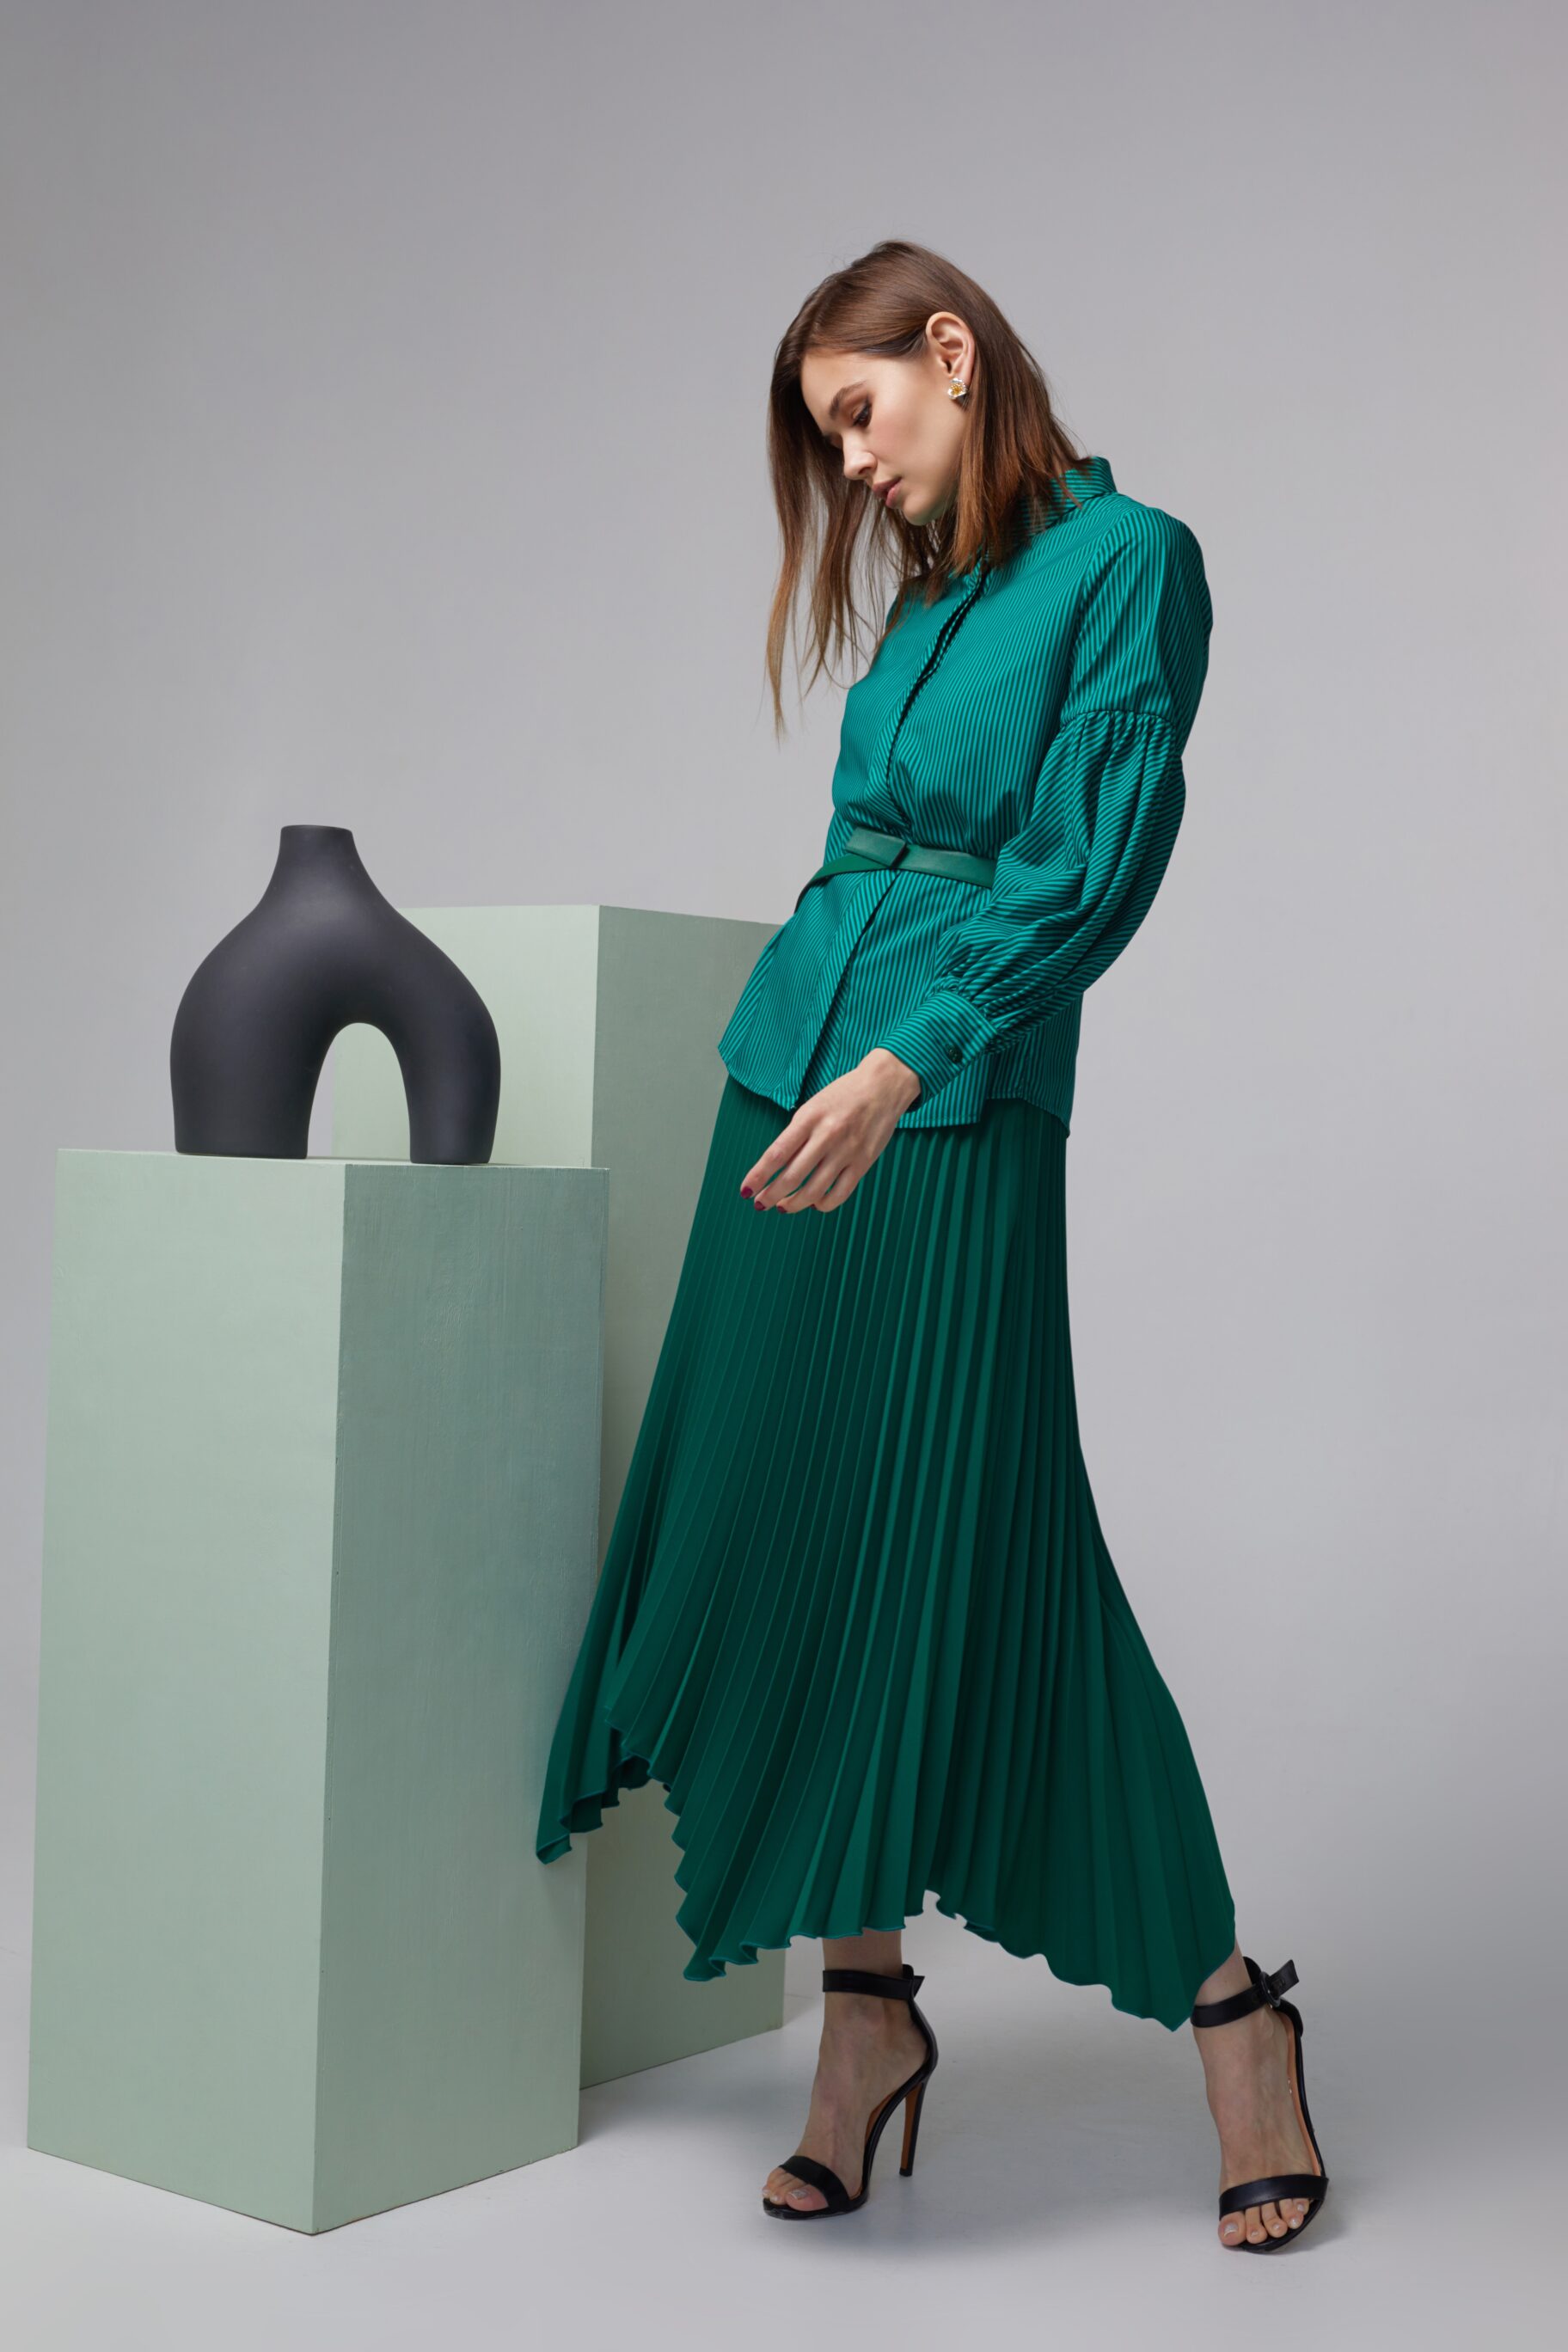 Turquoise Blouse And Green Pleated Skirt